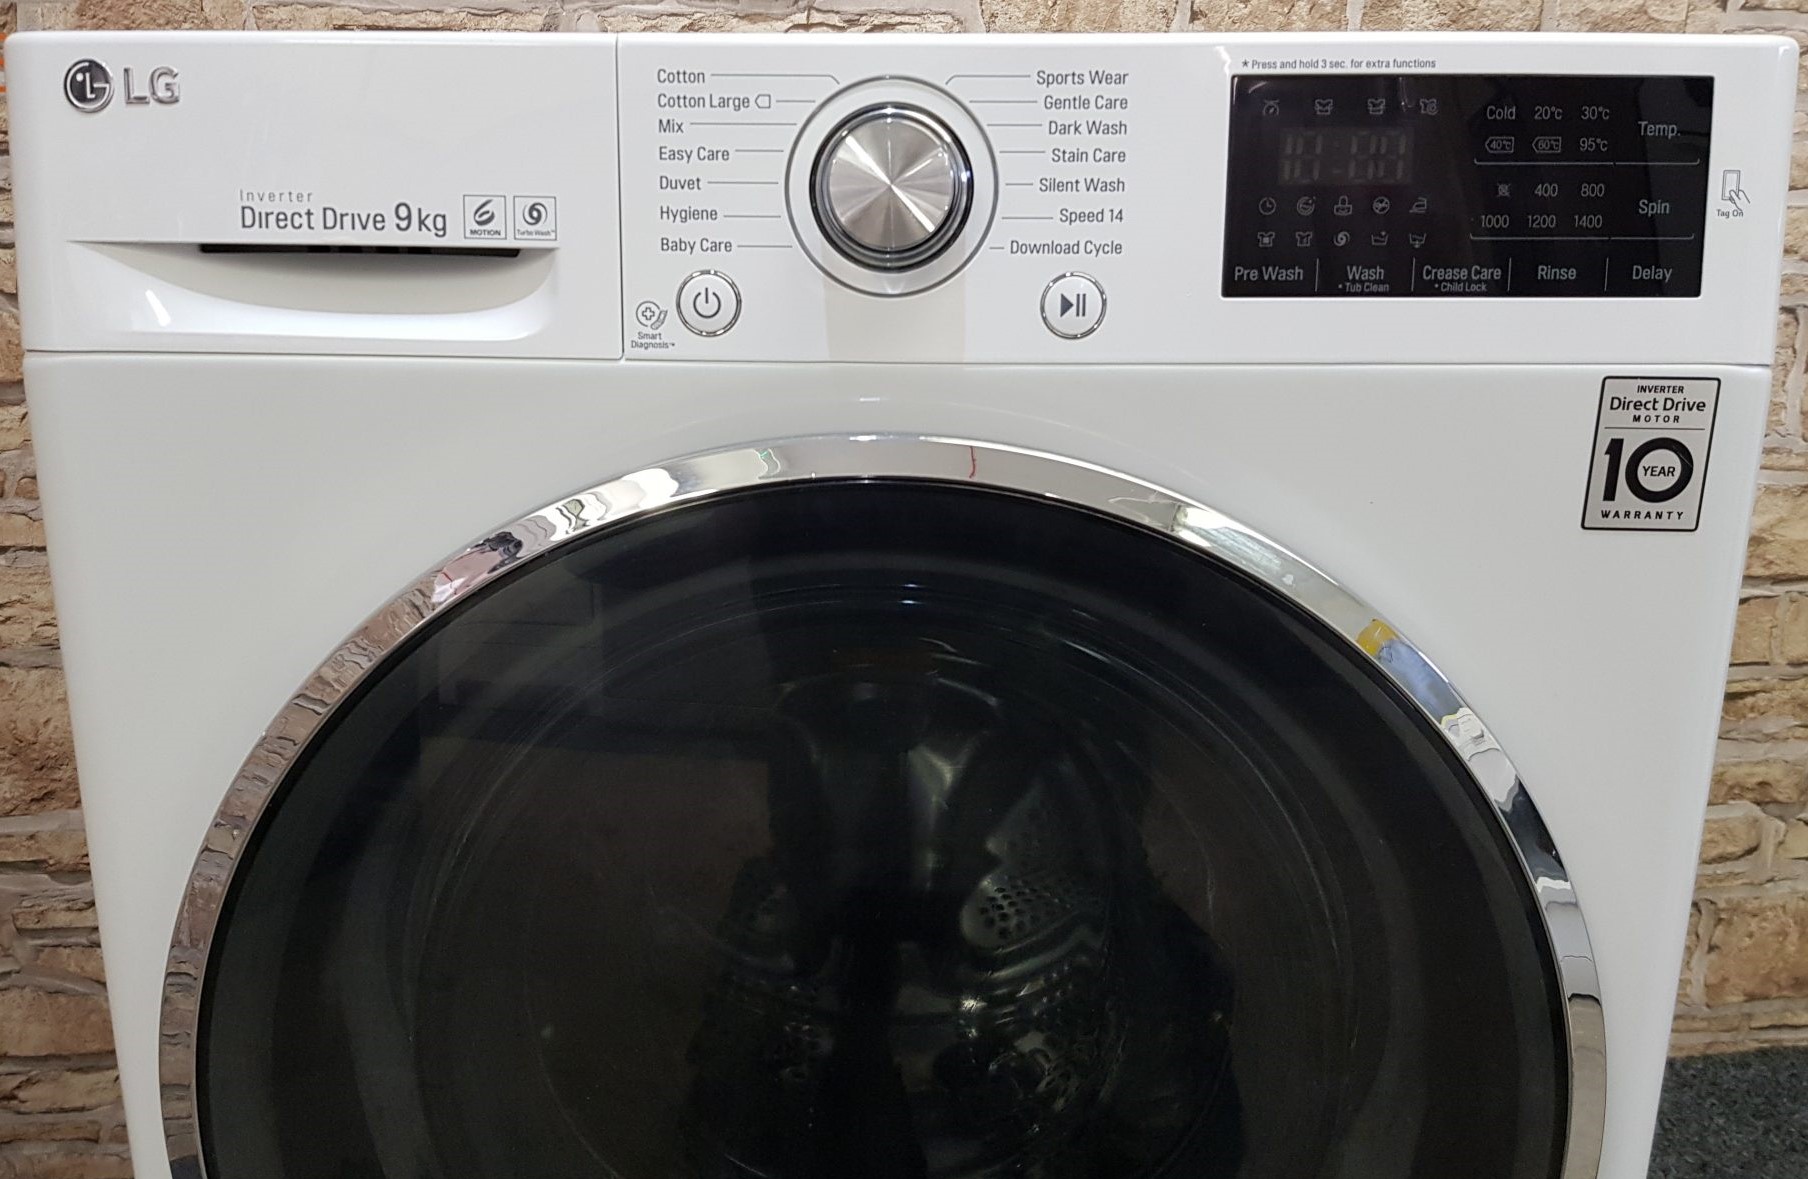 How To Fix The Error Code F0 For LG Washing Machine